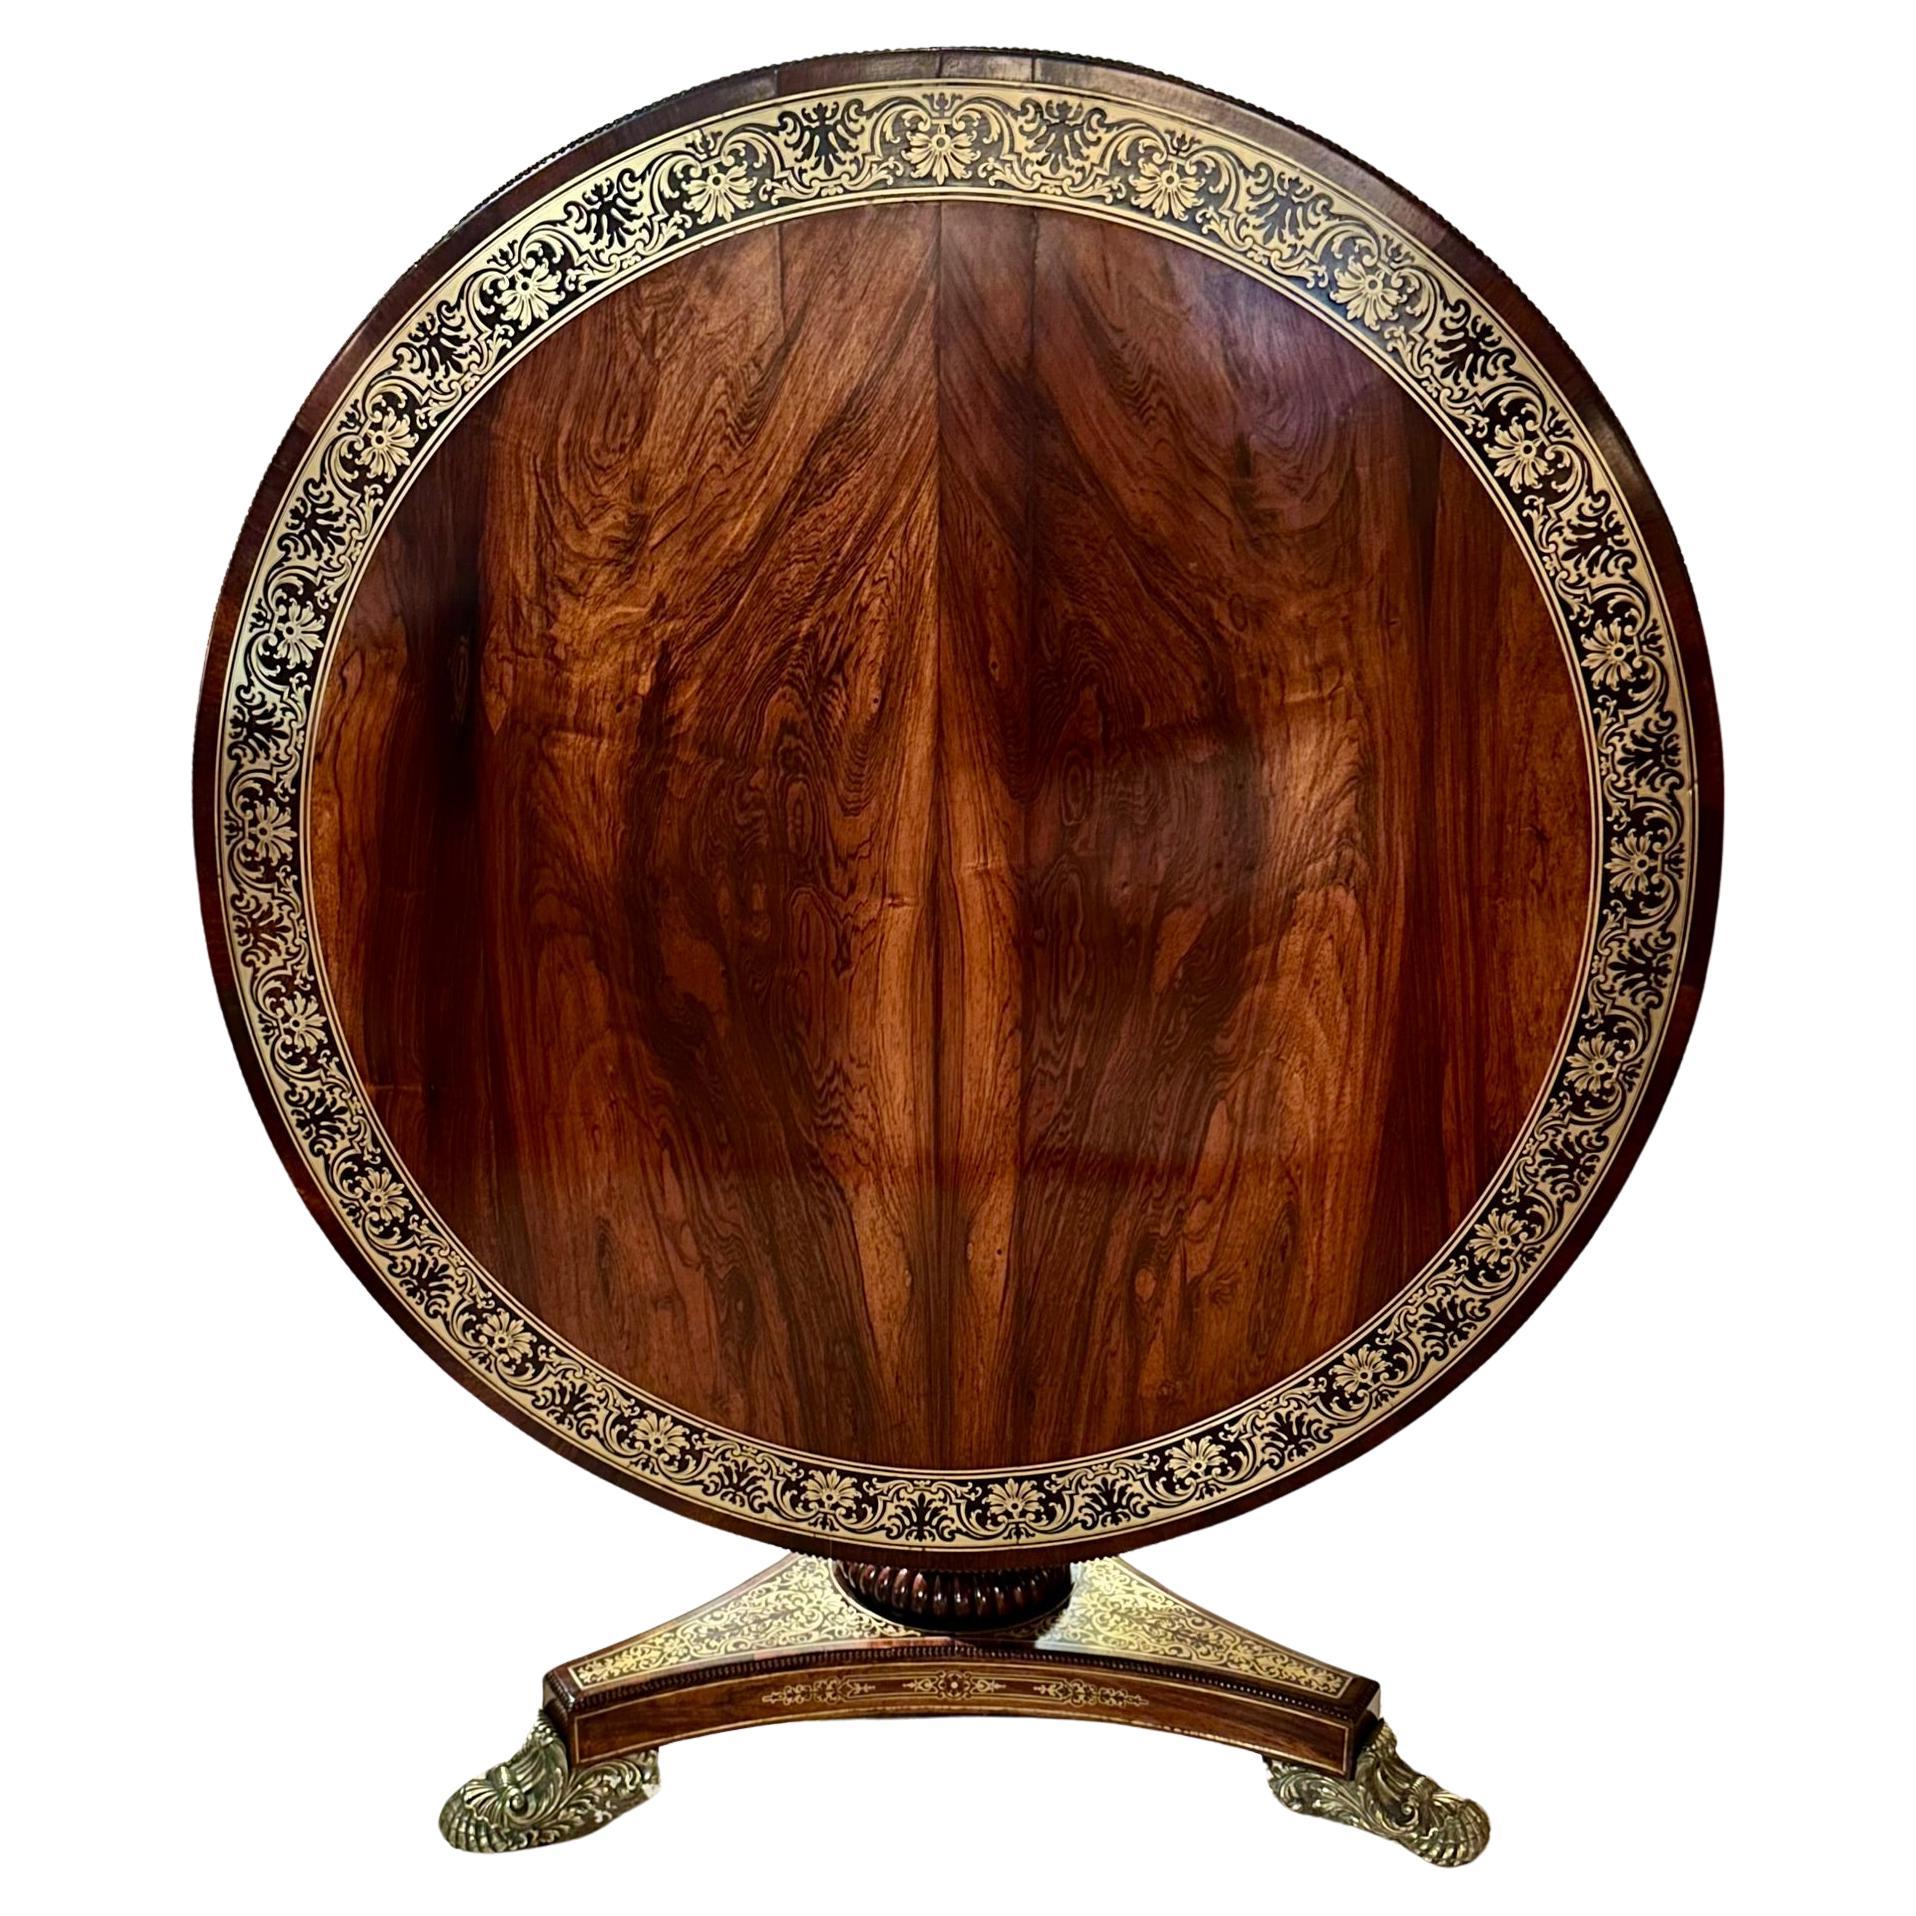 Antique English Regency Rosewood with Brass Inlay Tilt Top Center Table, Circa 1830.
Exquisite rosewood with intricate brass detailing throughout.